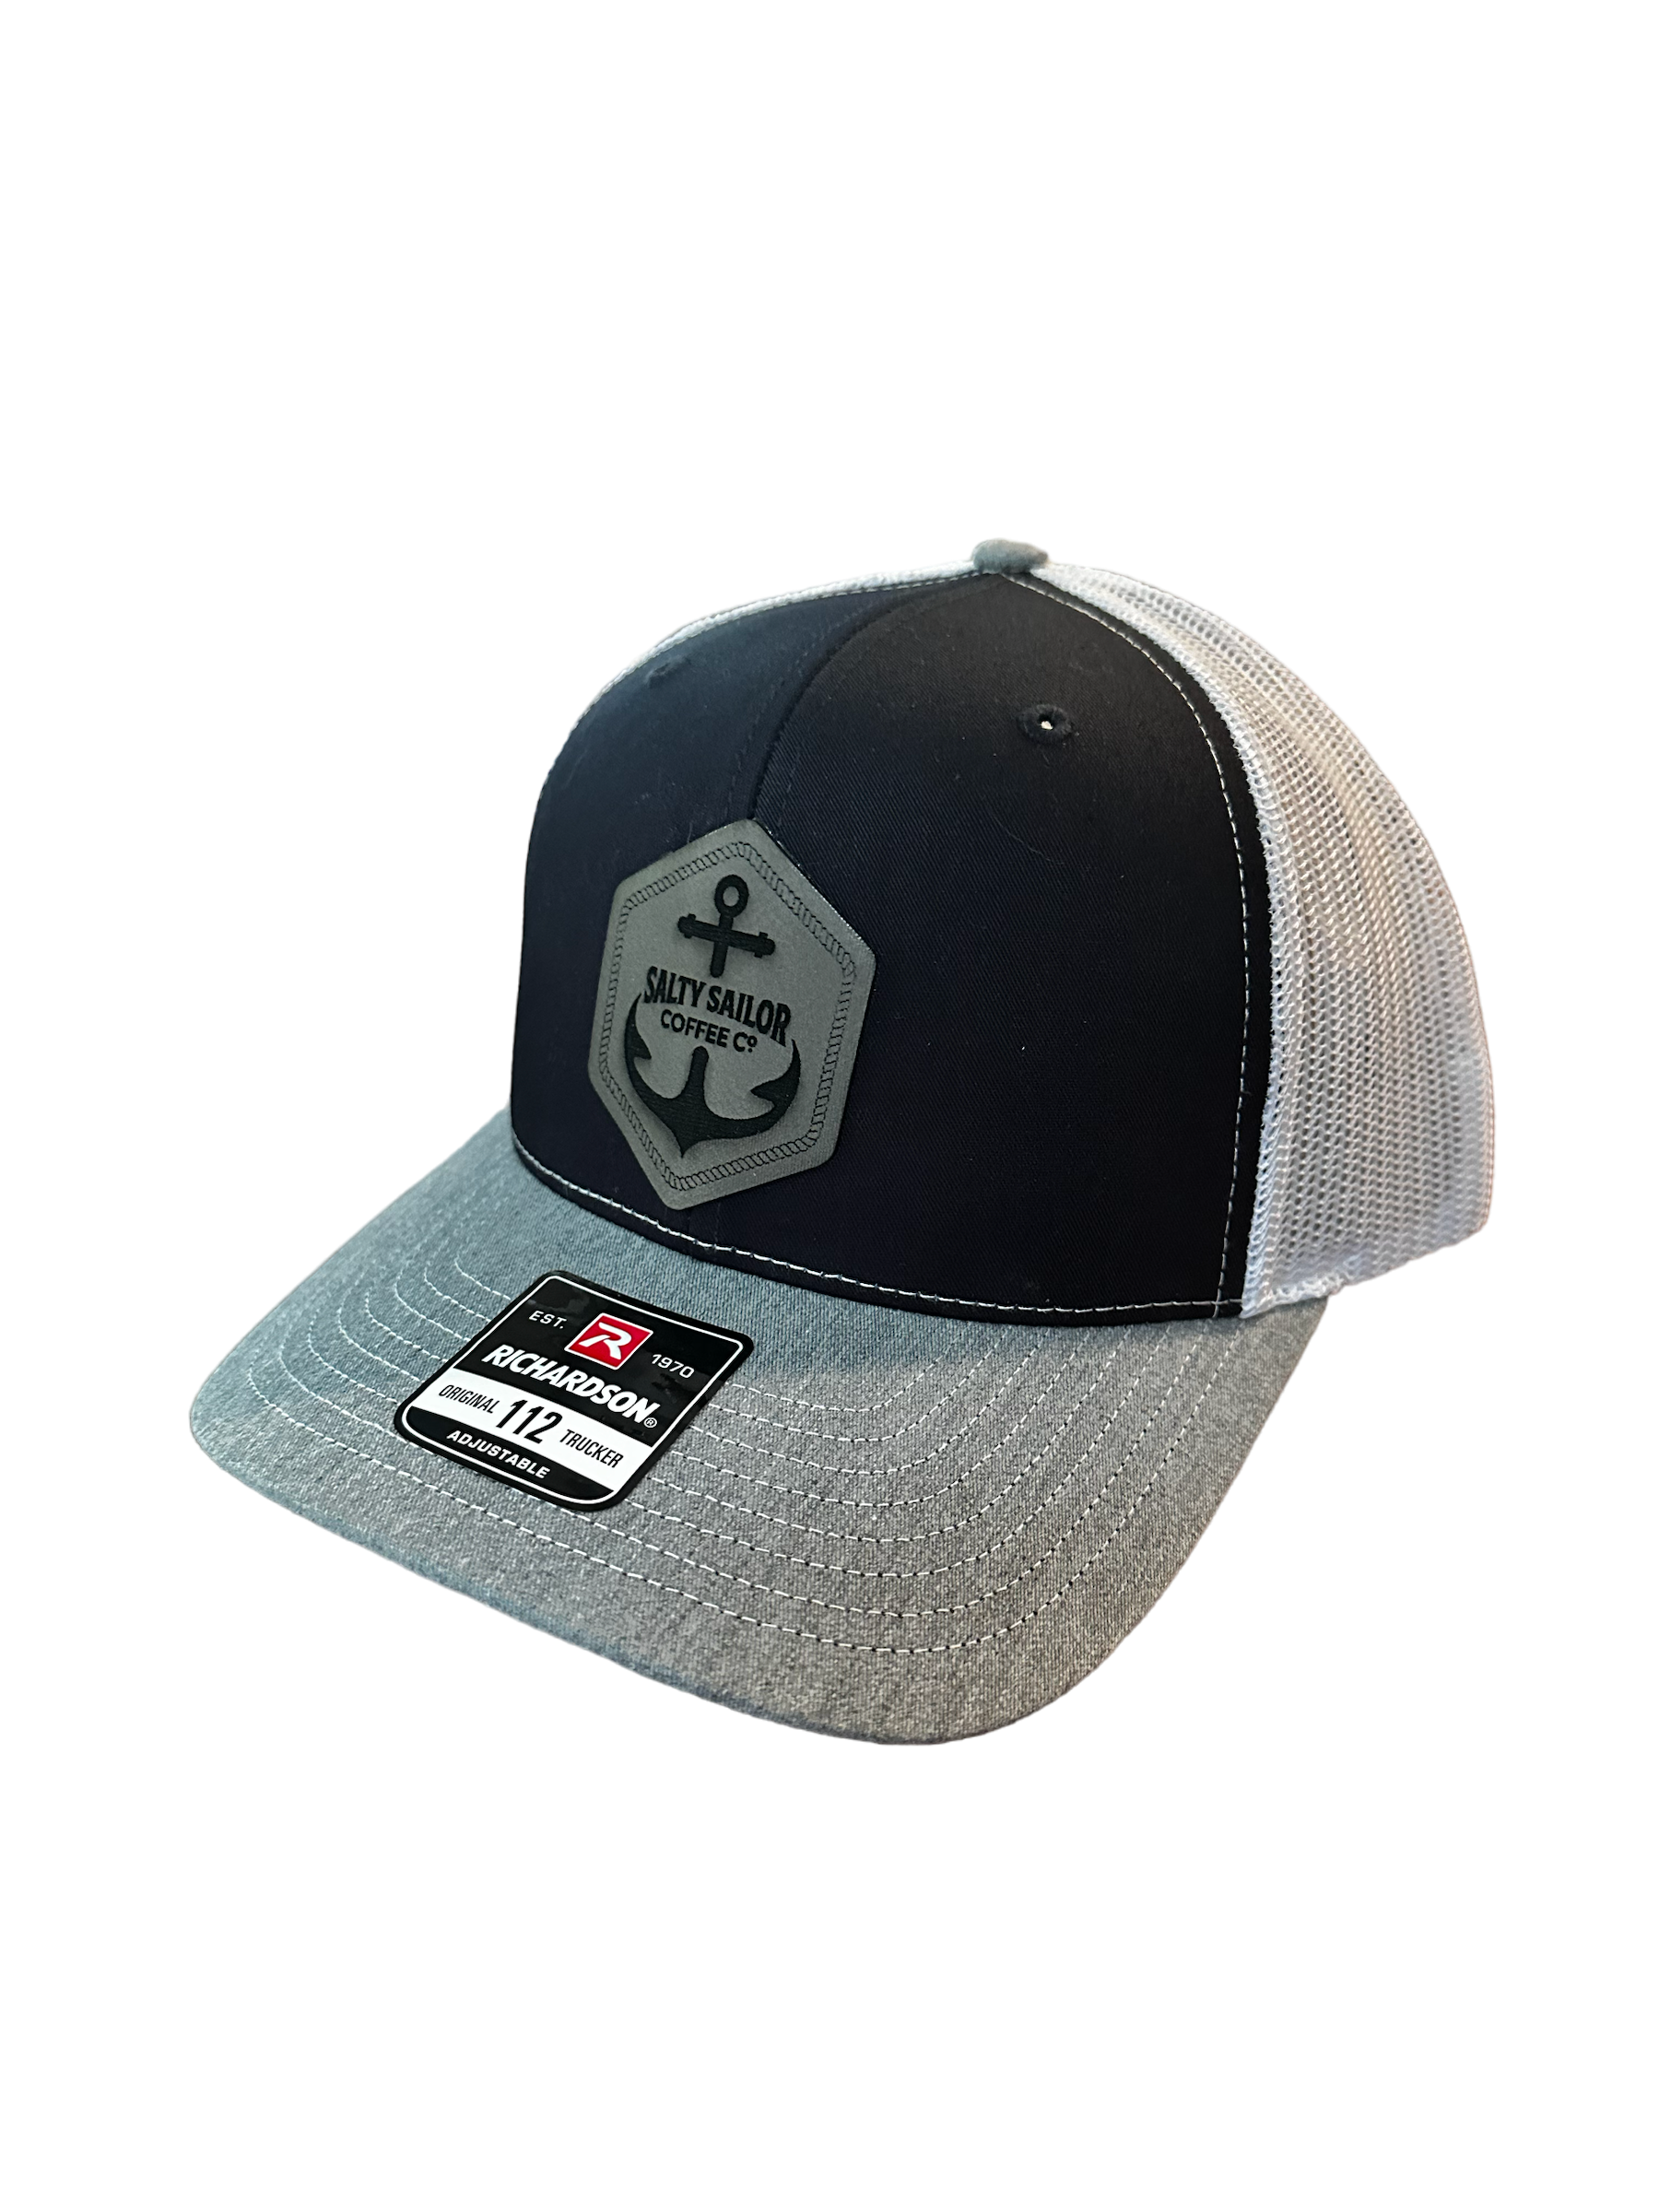 Salty Sailor Trucker Hat with Leather Emblem